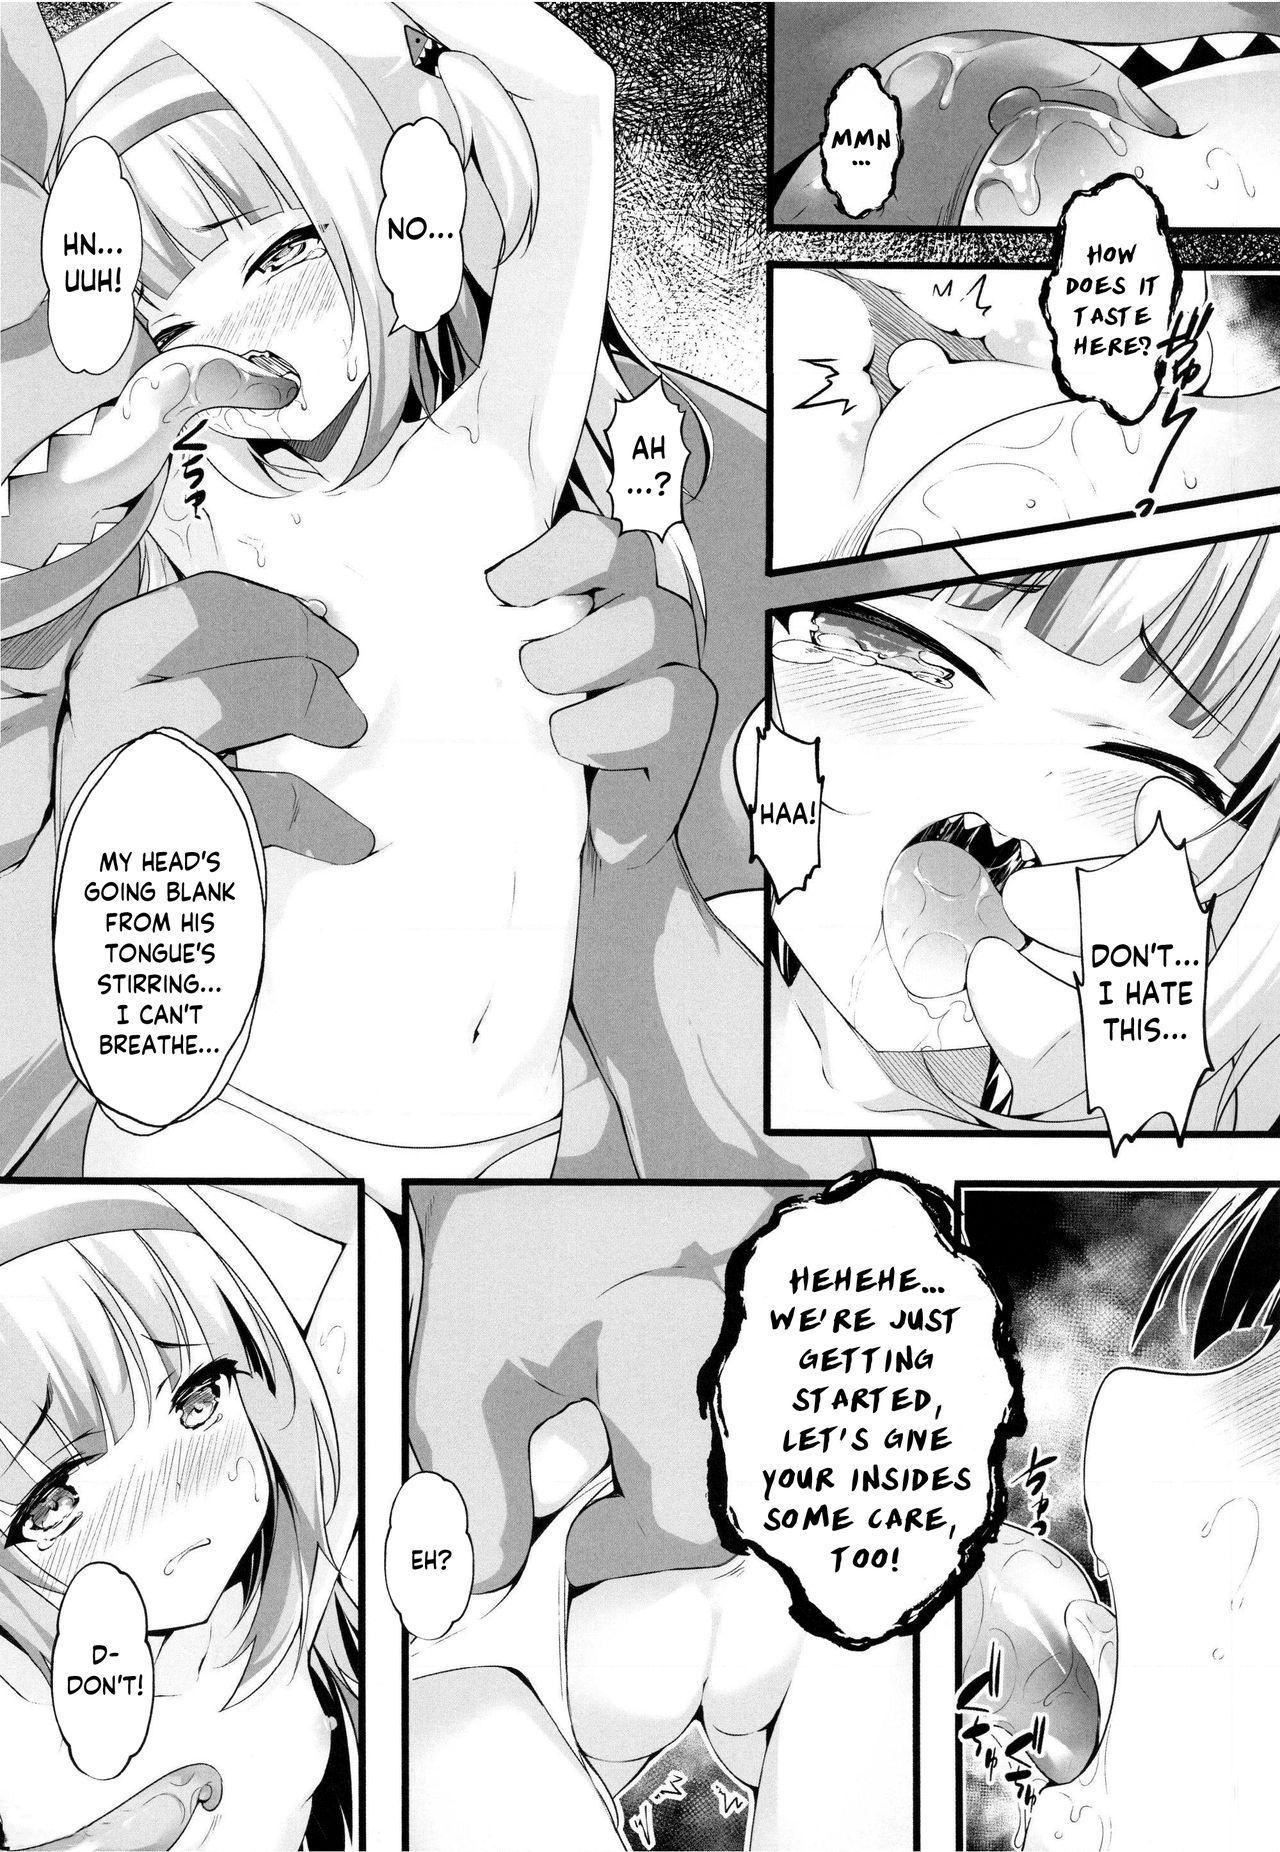 Family Porn Lets Sweat - Hololive Ring fit adventure Tiny Titties - Page 7